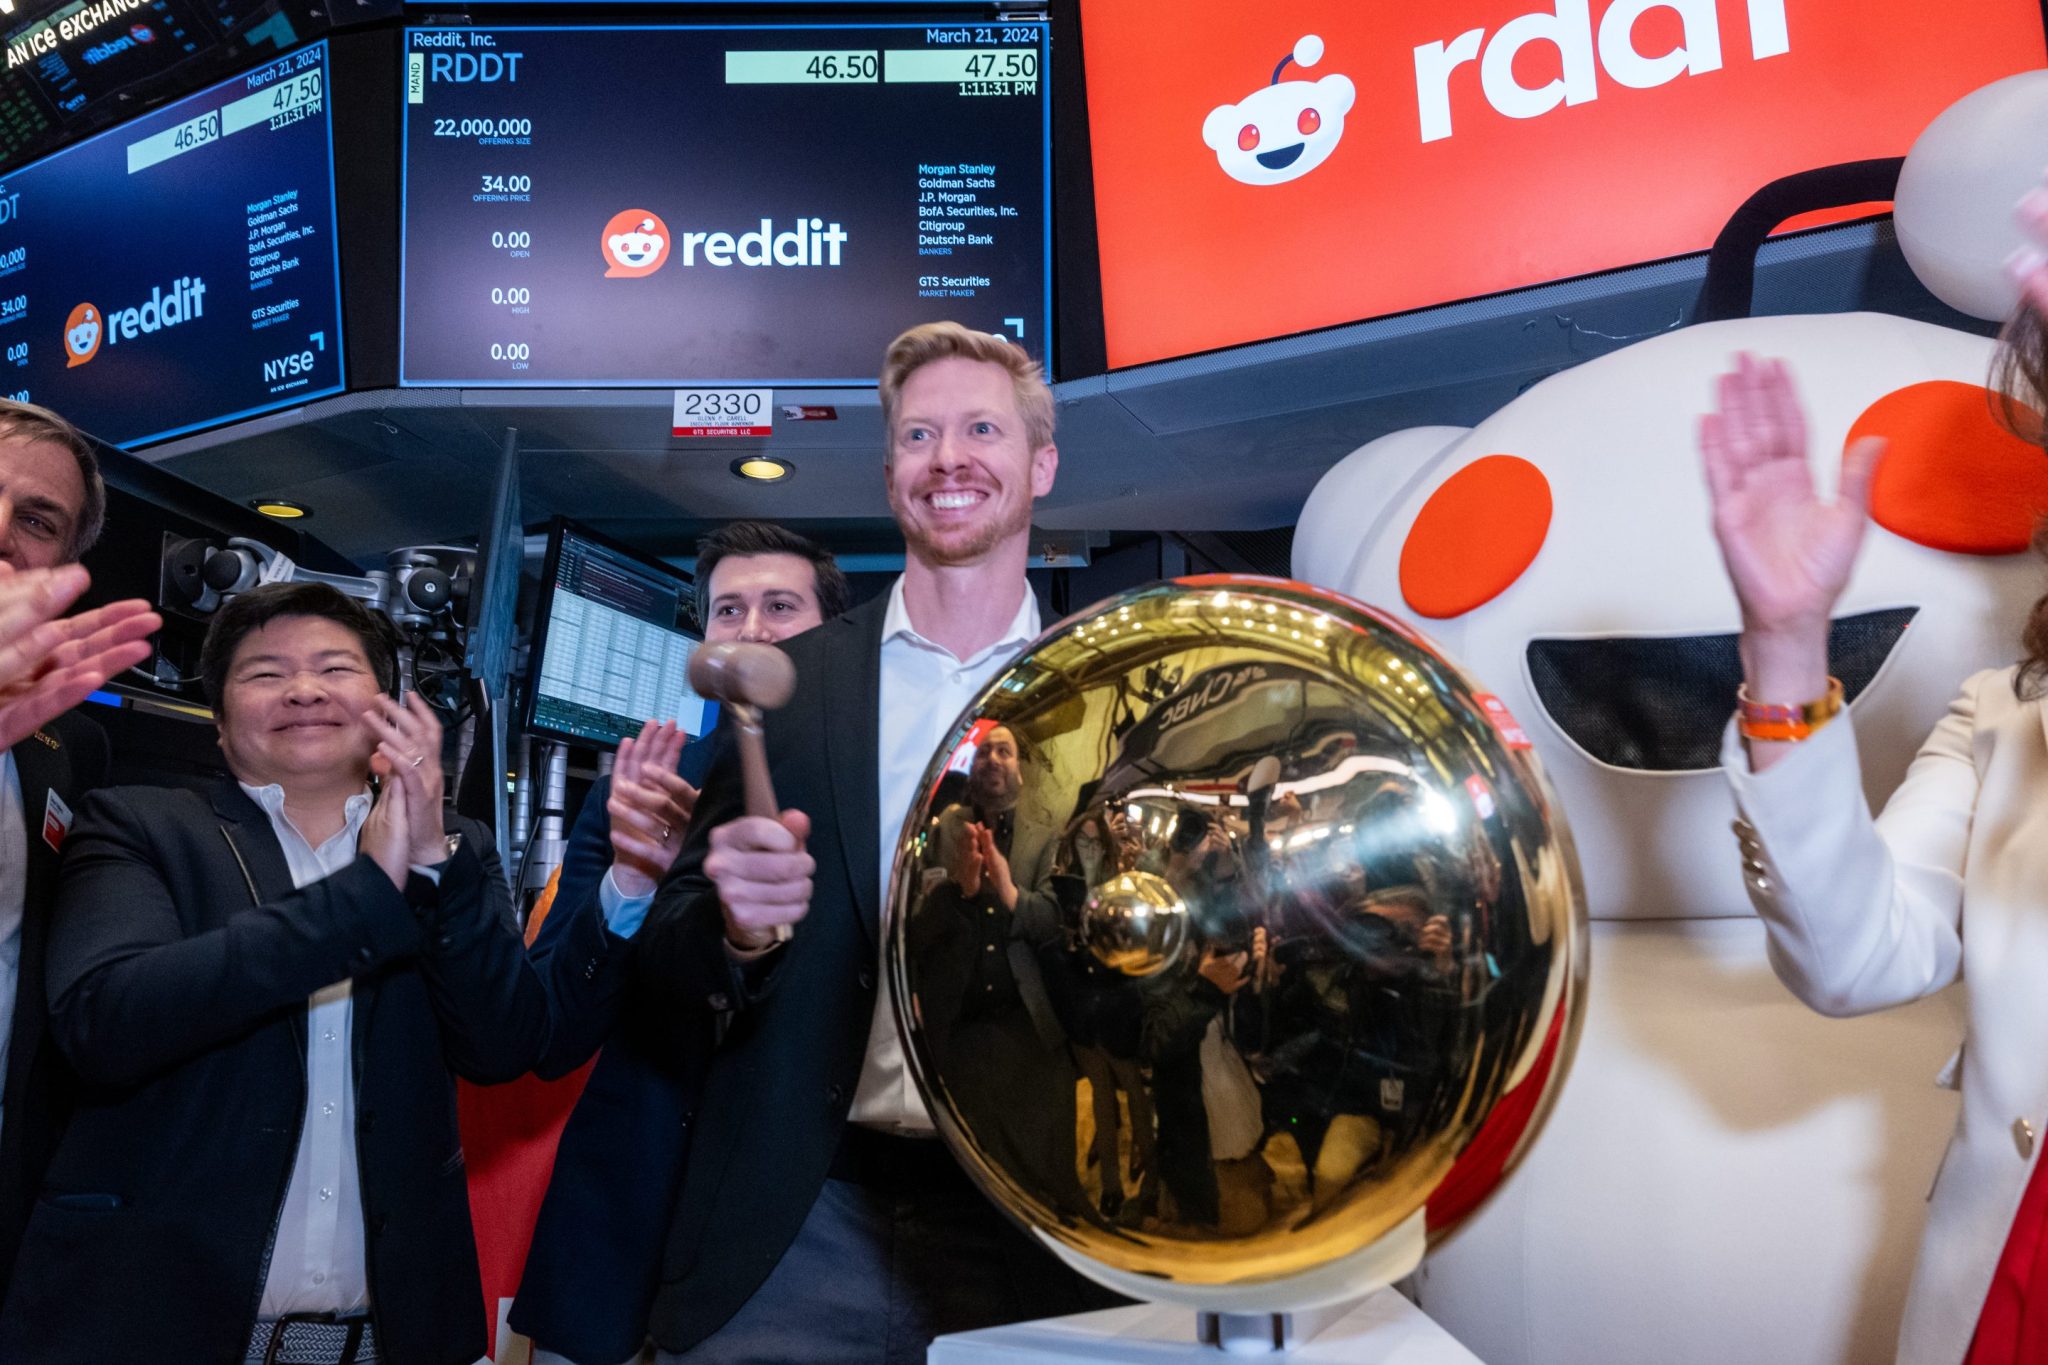 Reddit closes nearly 50% higher on 1st trading day in latest sign IPO market heating up